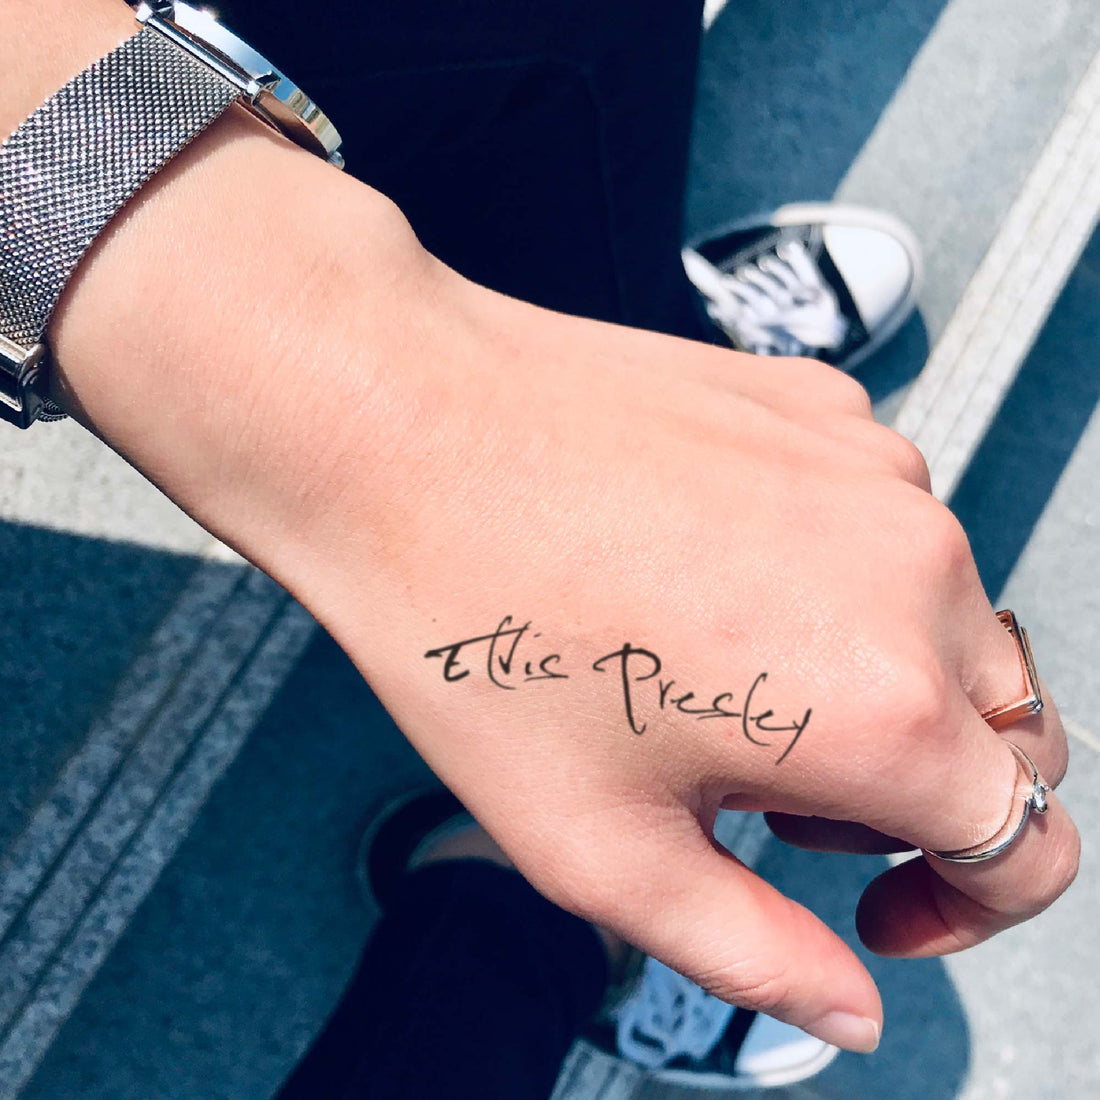 Elvis Presley custom temporary tattoo sticker design idea inspiration meanings removal arm wrist hand words font name signature calligraphy lyrics tour concert outfits merch accessory gift souvenir costumes wear dress up code